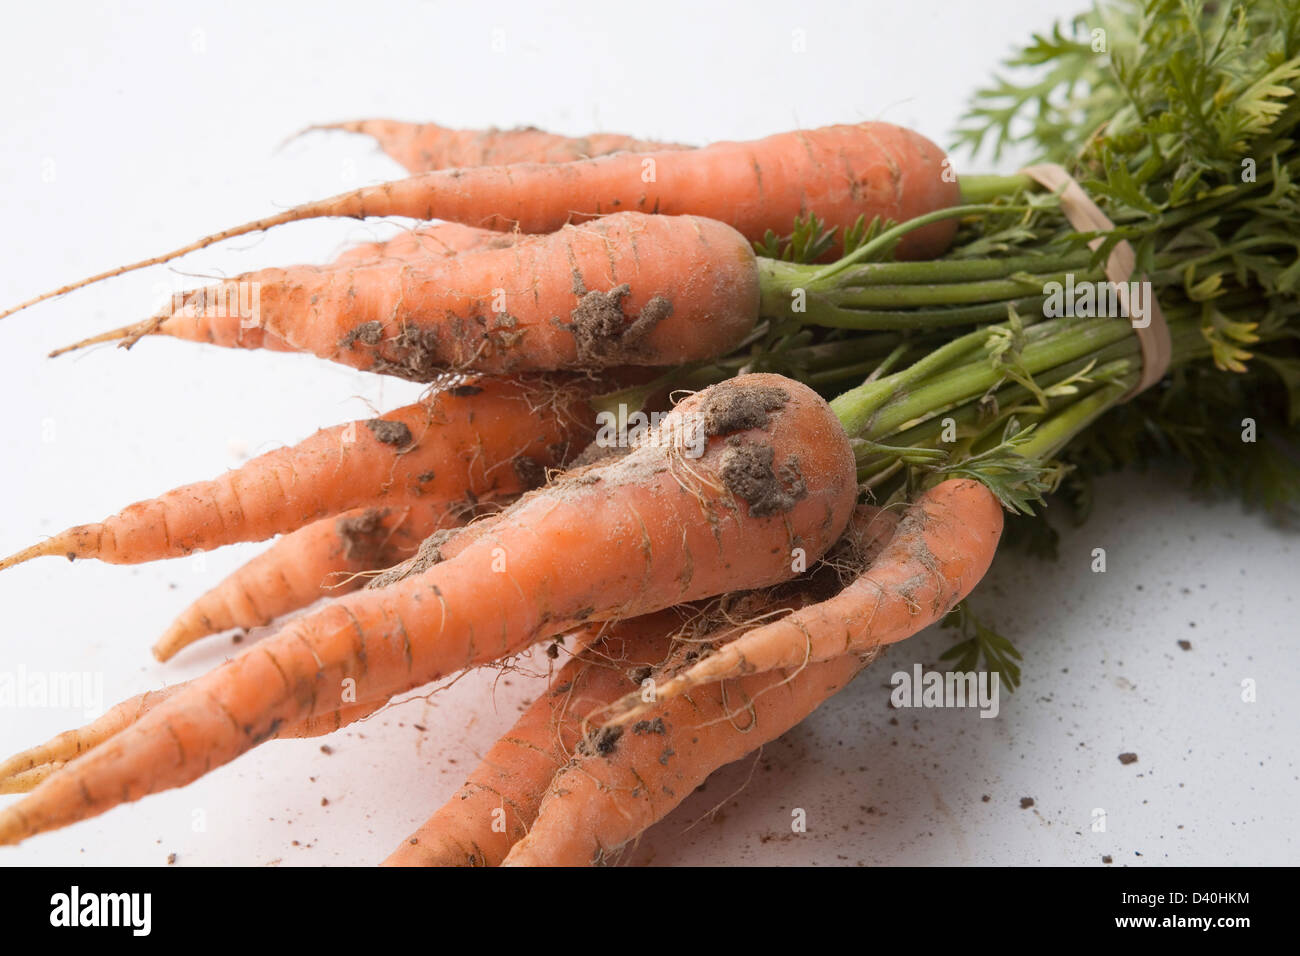 Bunch of carrots tied with an elastic band with green tops, some soil and roots showing, photographed against white background Stock Photo